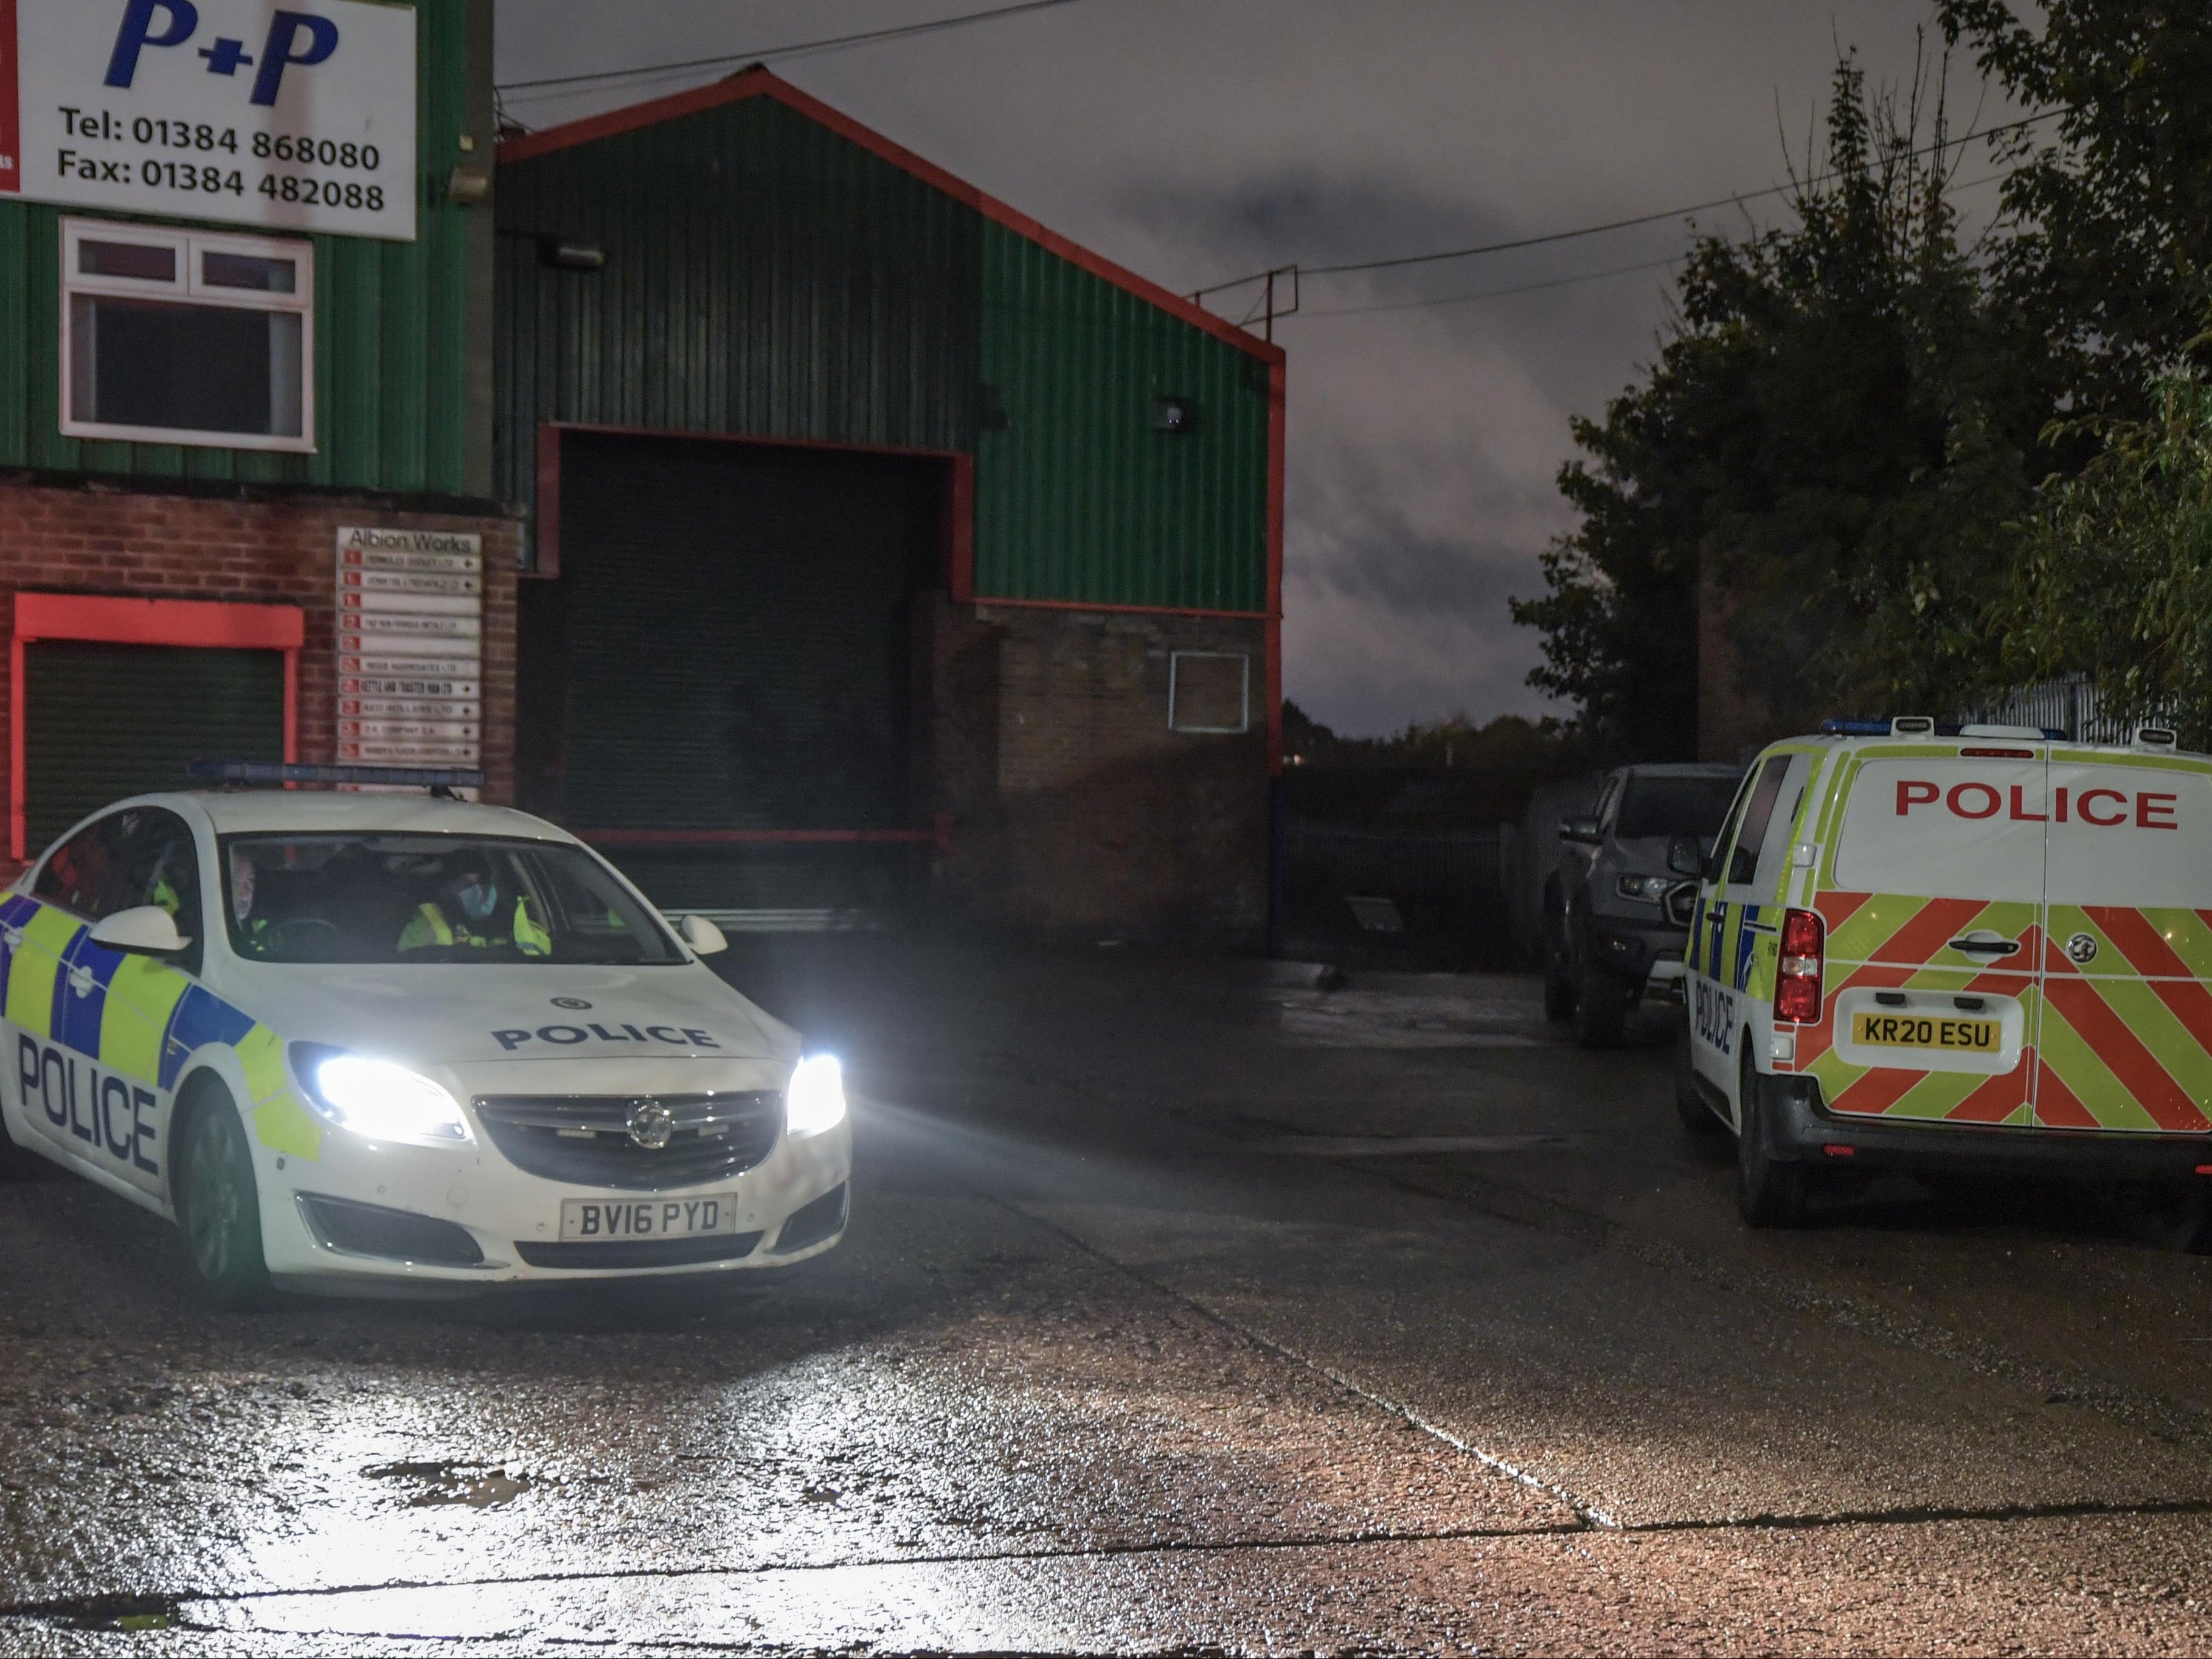 Police sealed off the industrial estate, put cordons in place to preserve the scene and enquiries are underway